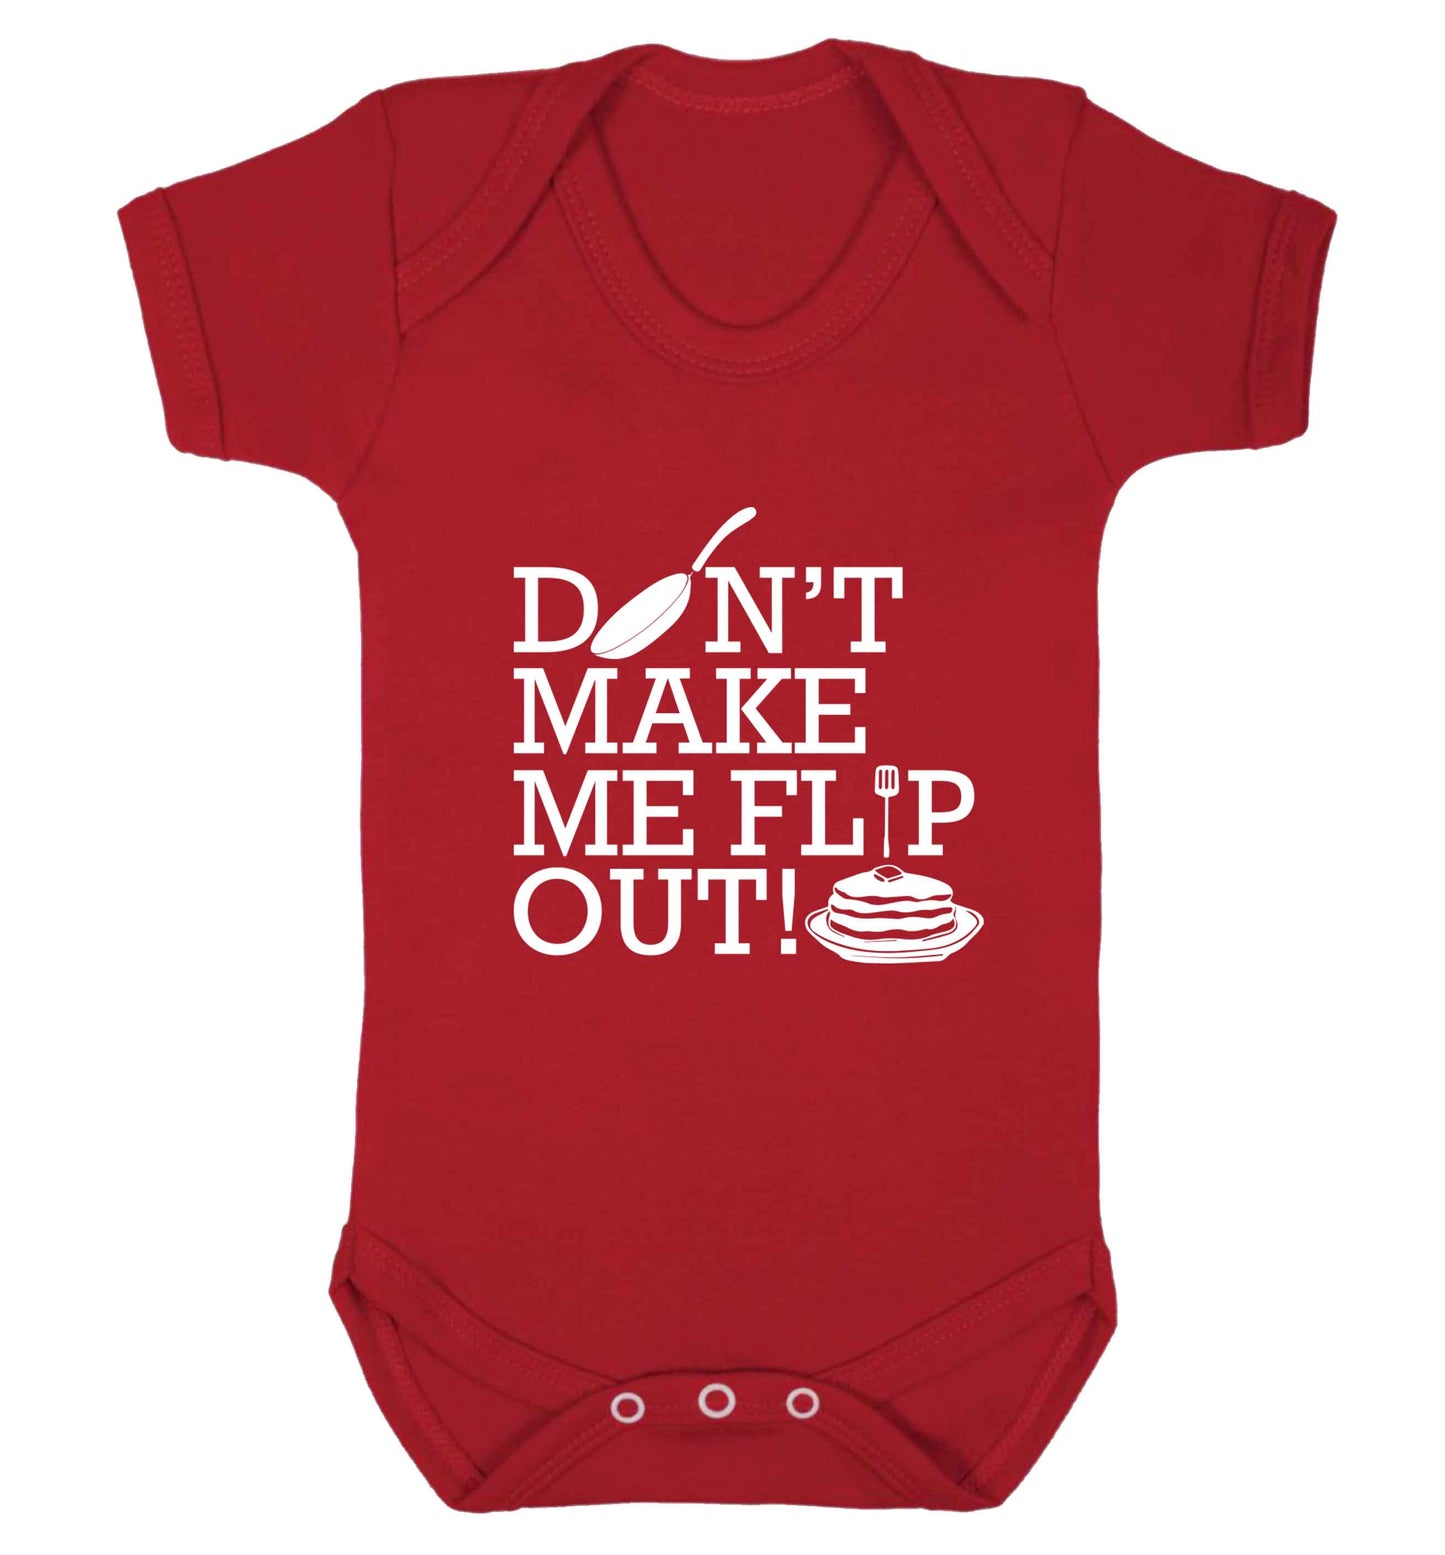 Don't make me flip out baby vest red 18-24 months